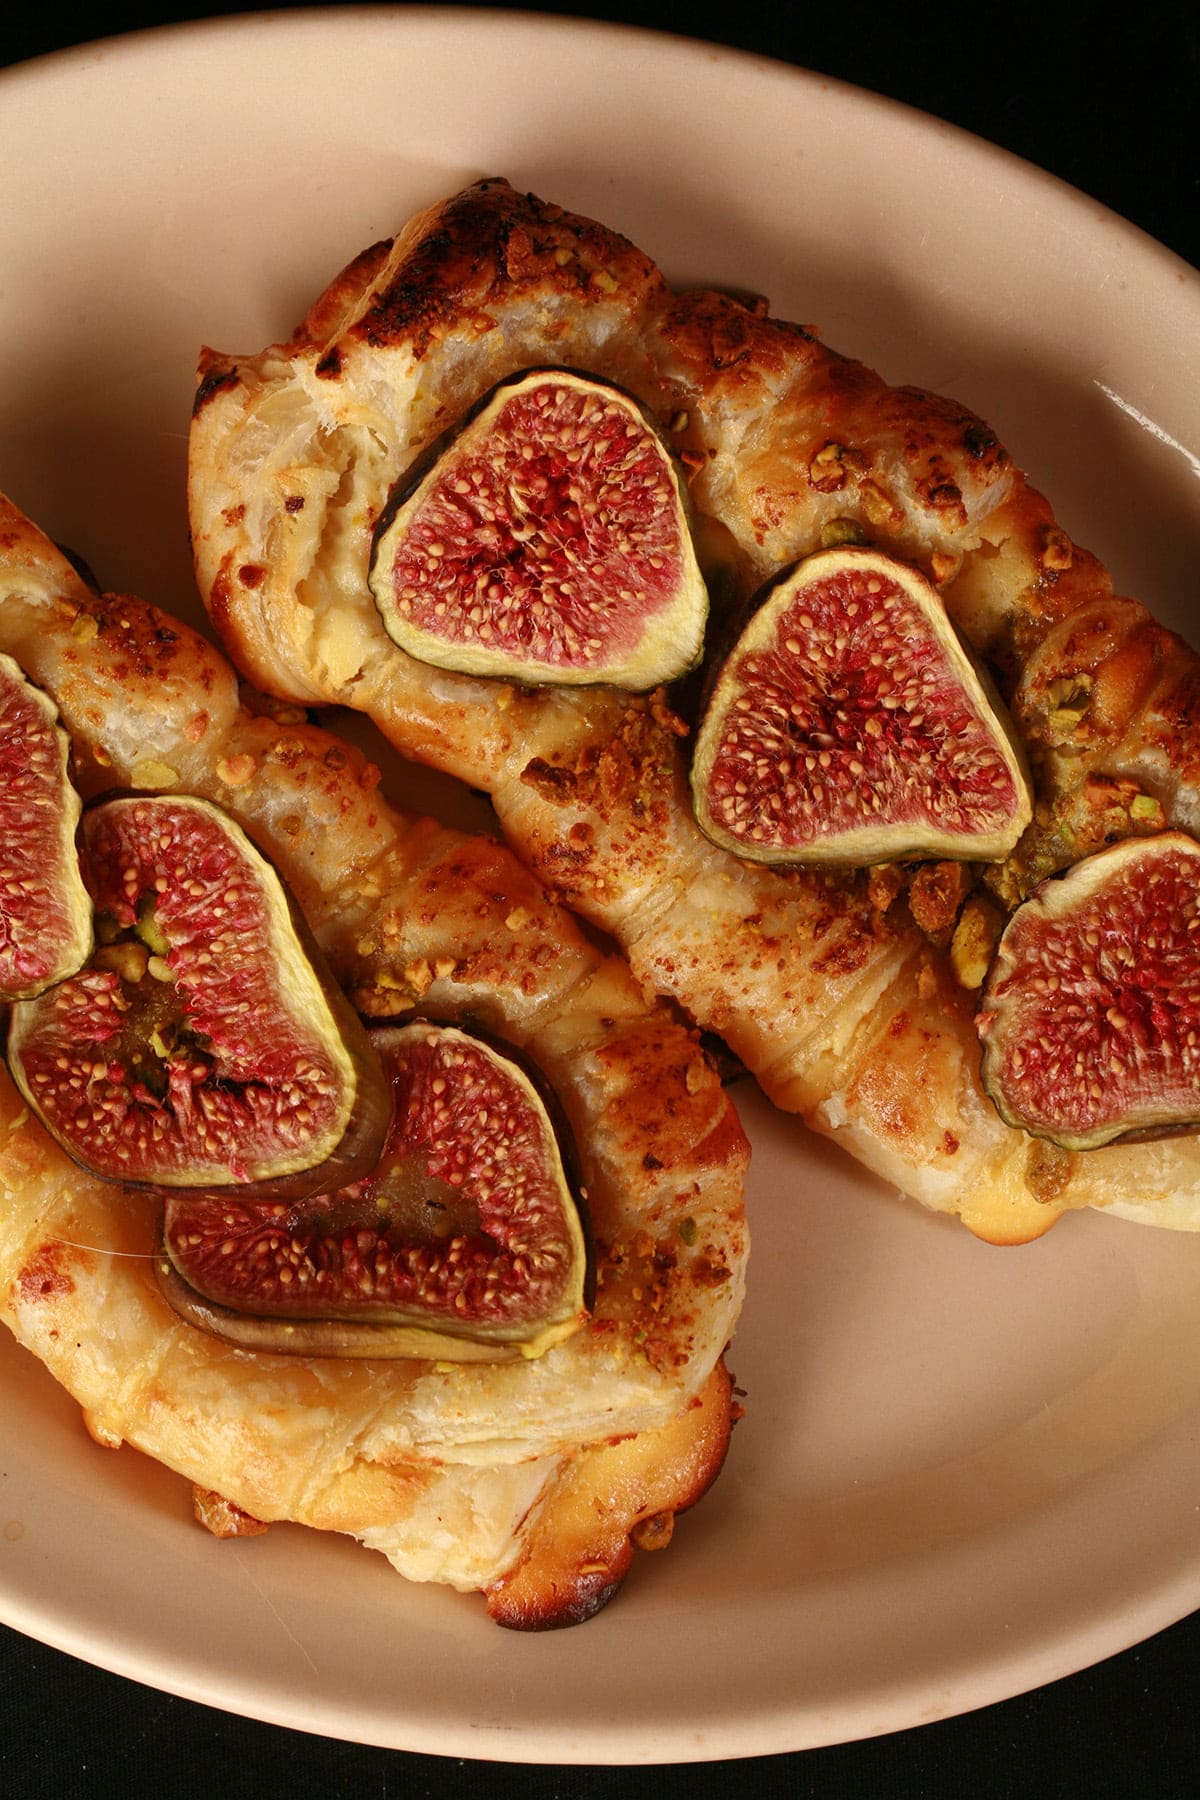 A close up view of two fig, honey, and goat cheese strudel pastries on a tan coloured plate.